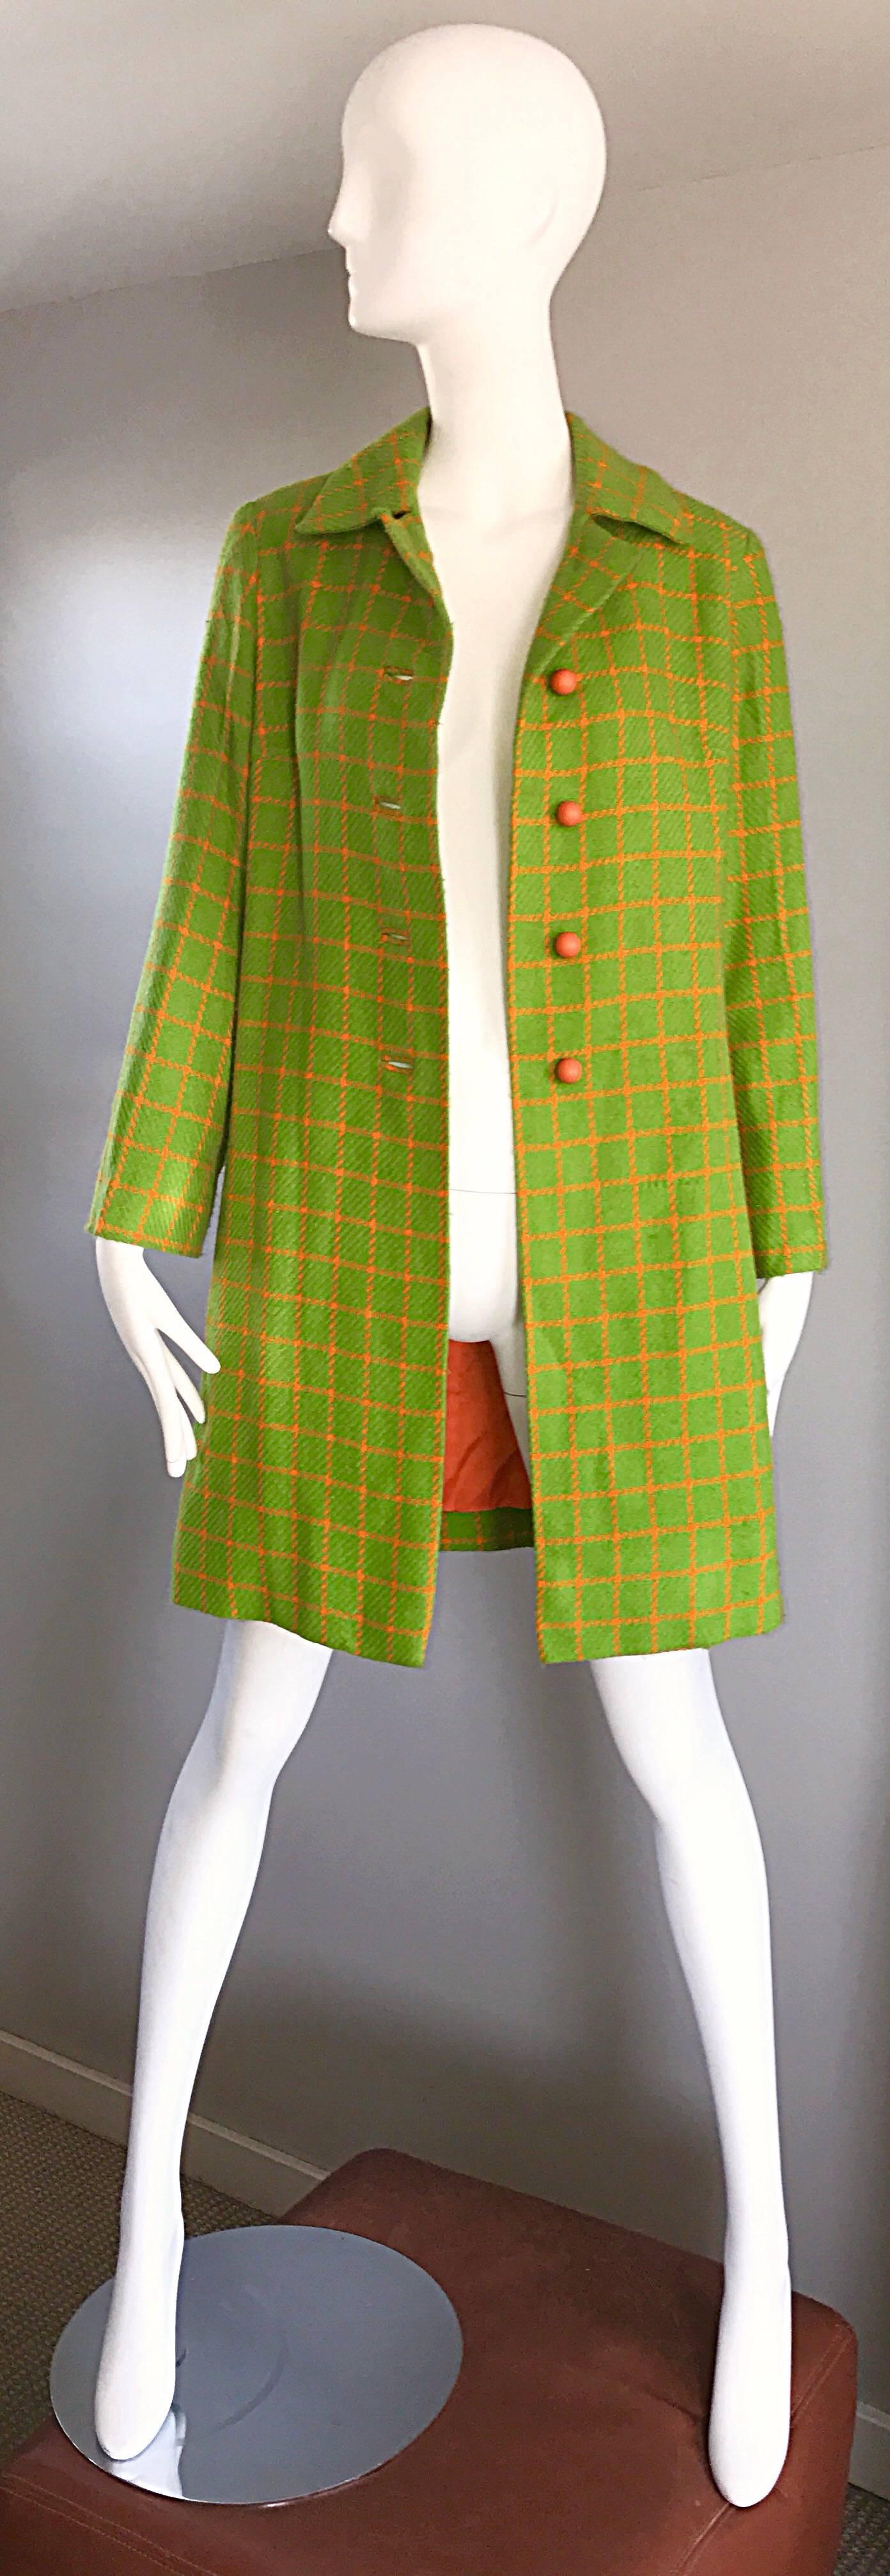 1960s Neon Lime Green and Orange Checkered Vintage 60s Wool Swing Jacket Coat 2